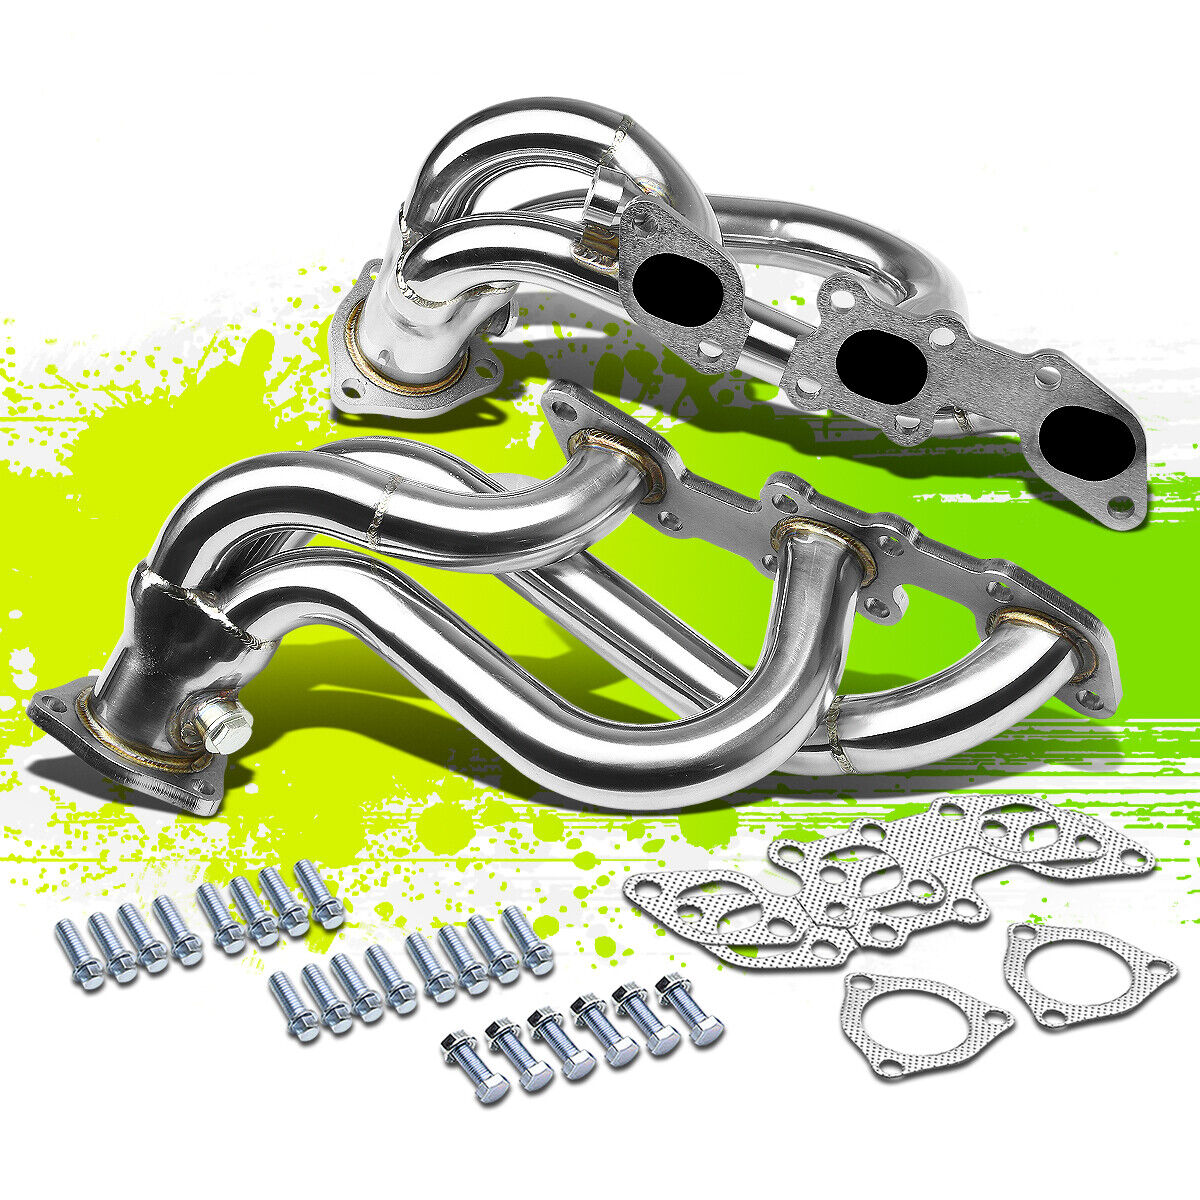 FOR 90-96 300ZX Z32 NON-TURBO 6-2 RACING/PERFORMANCE EXHAUST HEADER MANIFOLD